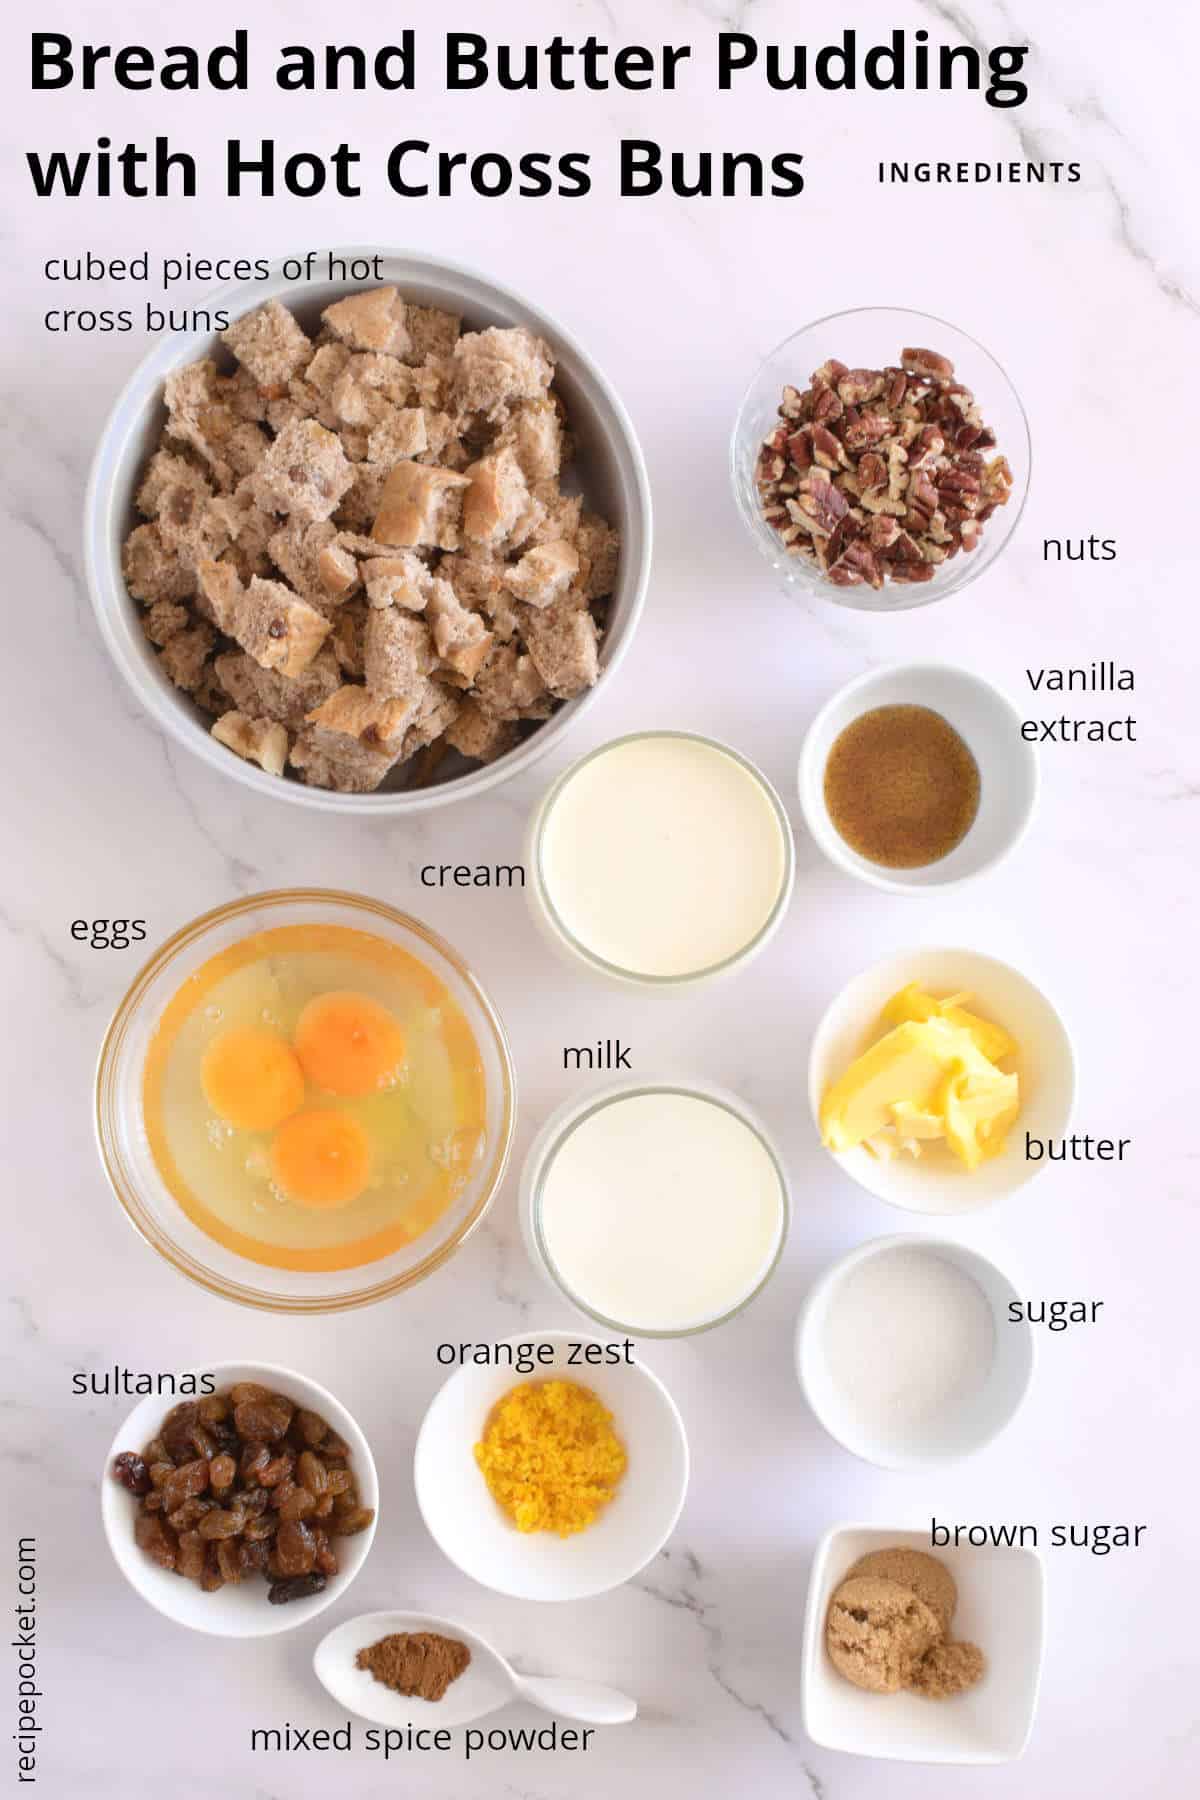 Ingredient image for bread and butter pudding.